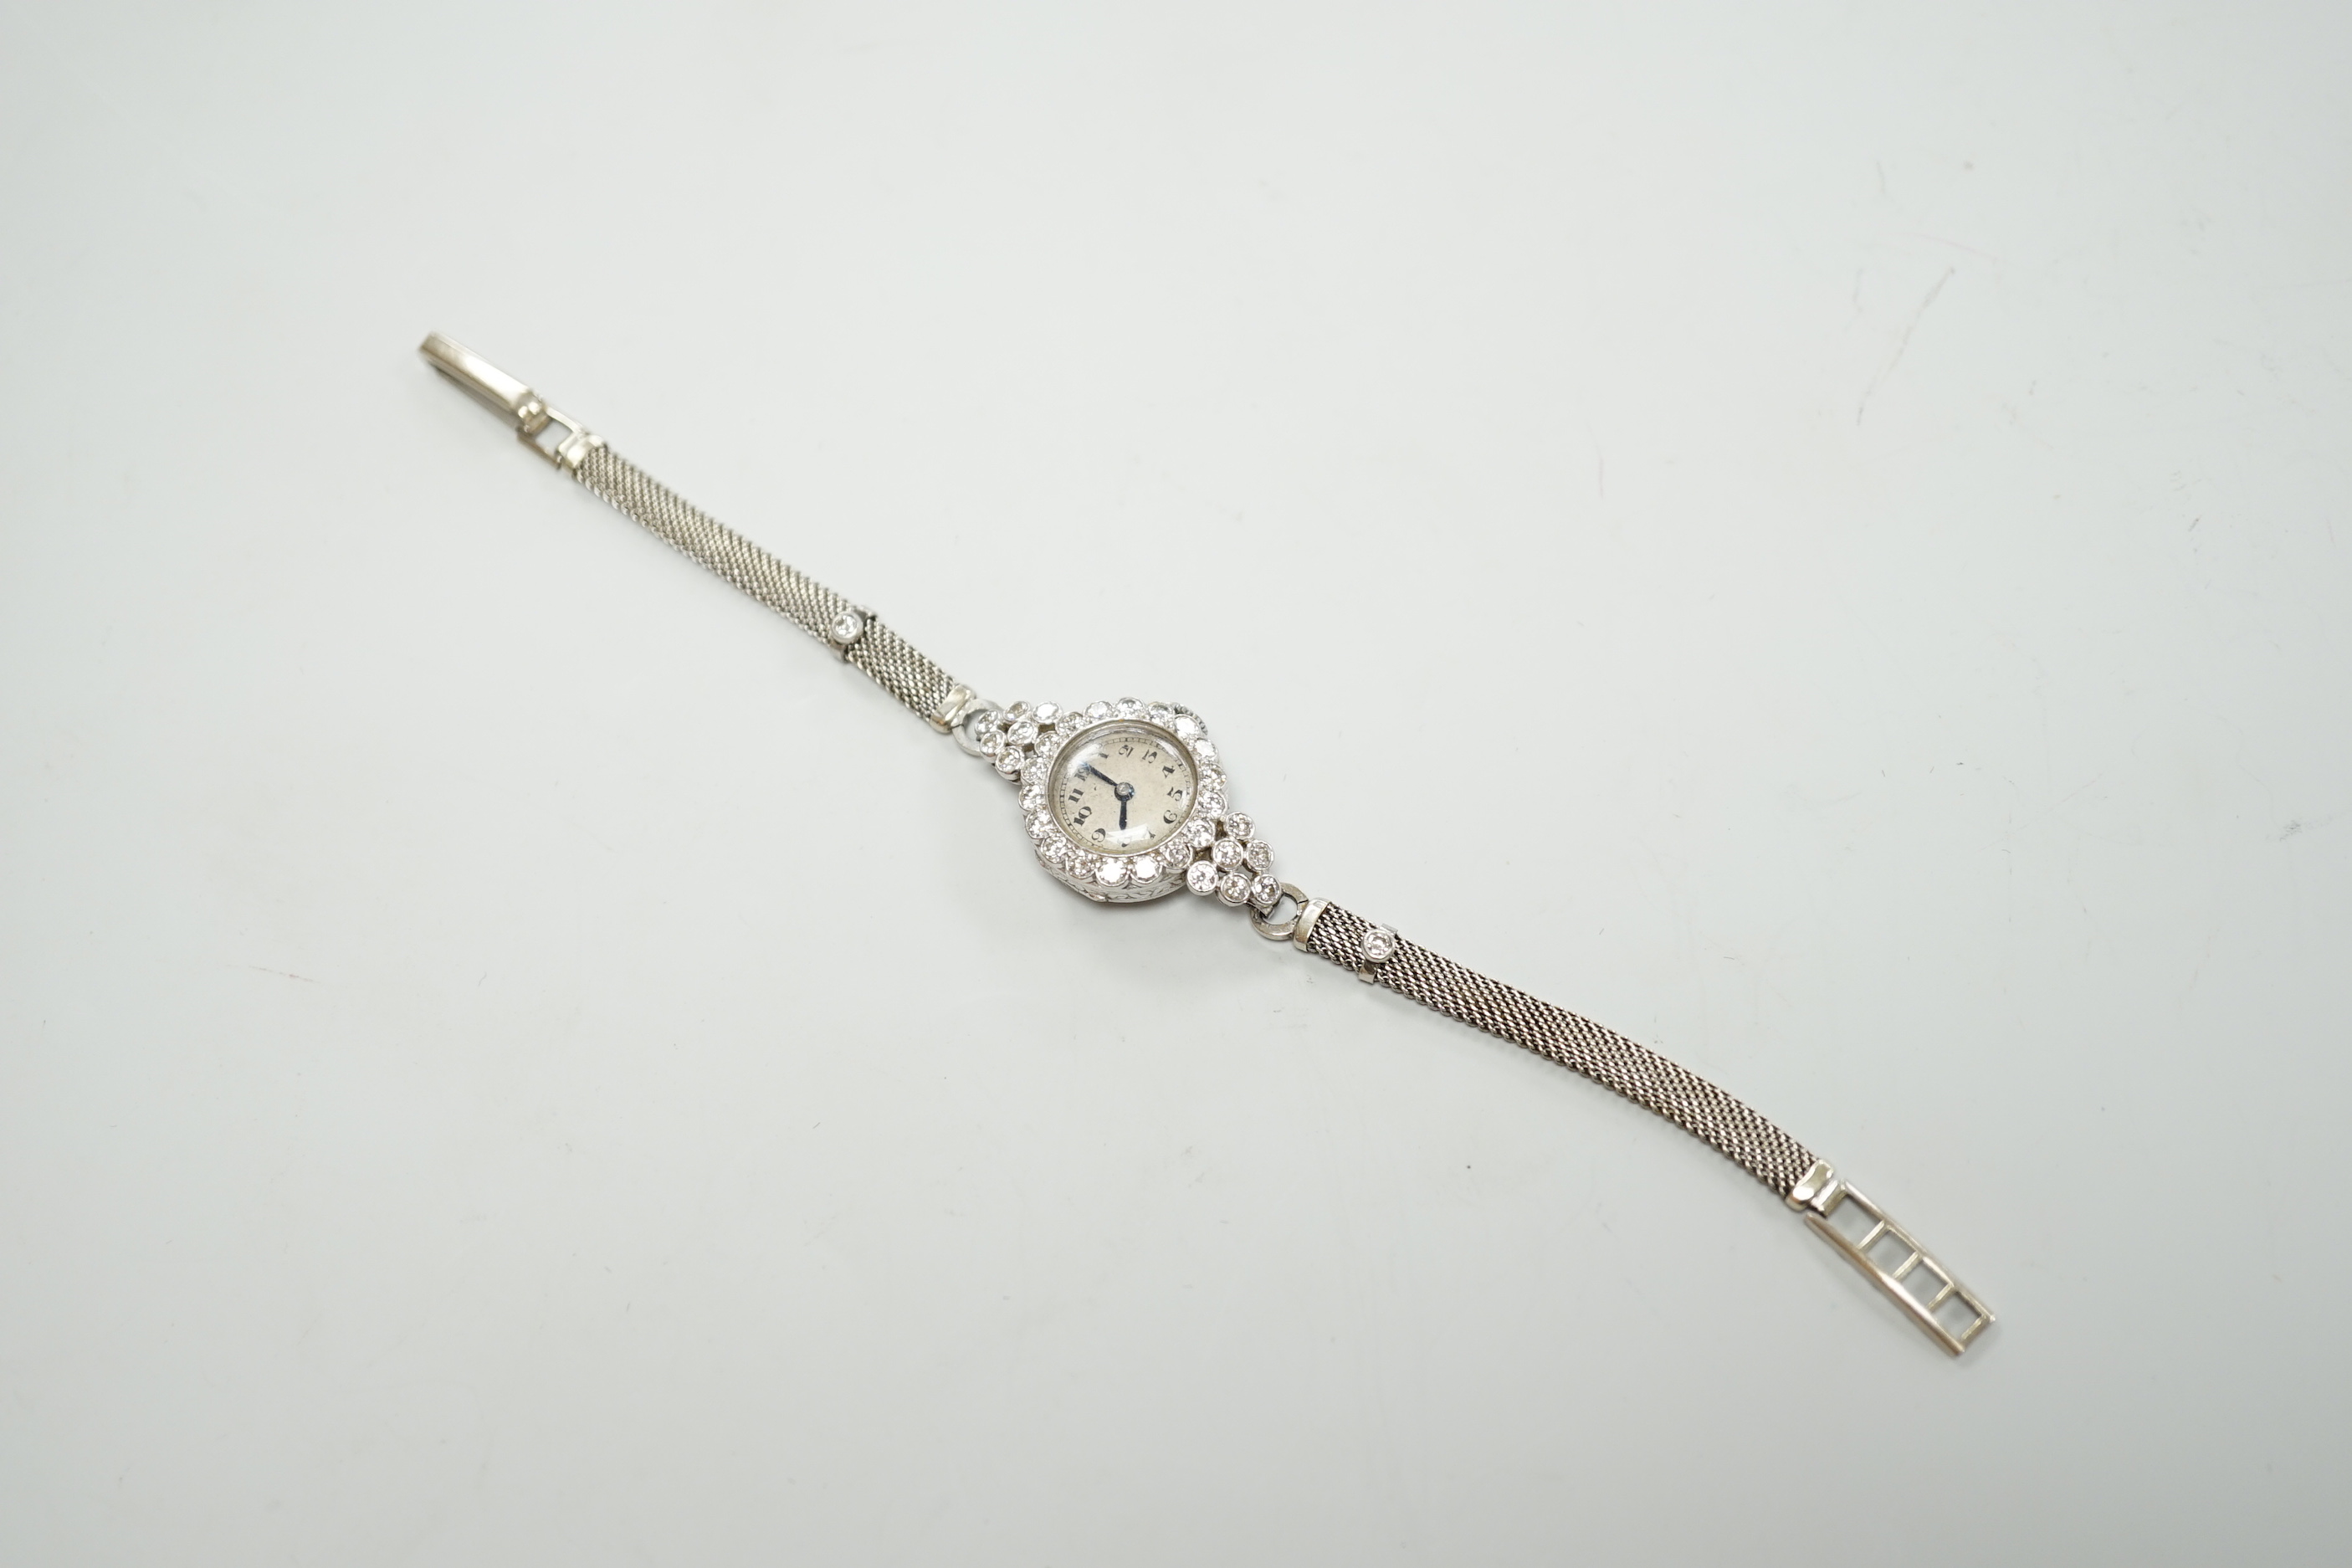 A lady's white metal and diamond set Movado manual wind cocktail watch, on a diamond set 9ct white metal mesh link bracelet, gross weight 18 grams.